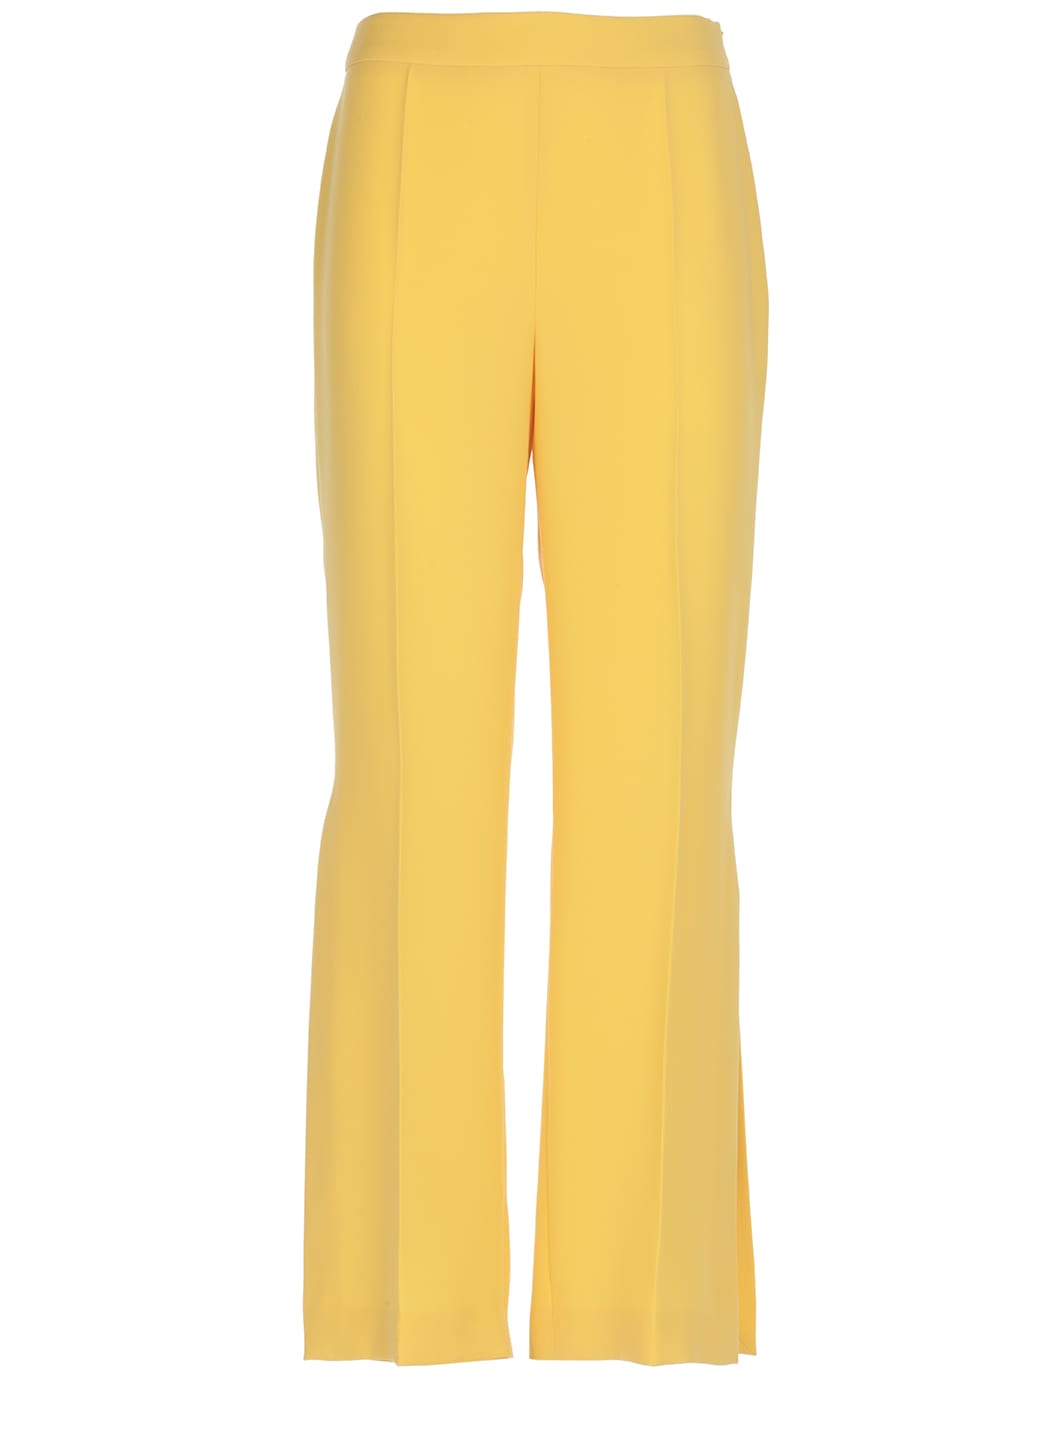 Boutique Moschino Flare Trousers With Vents